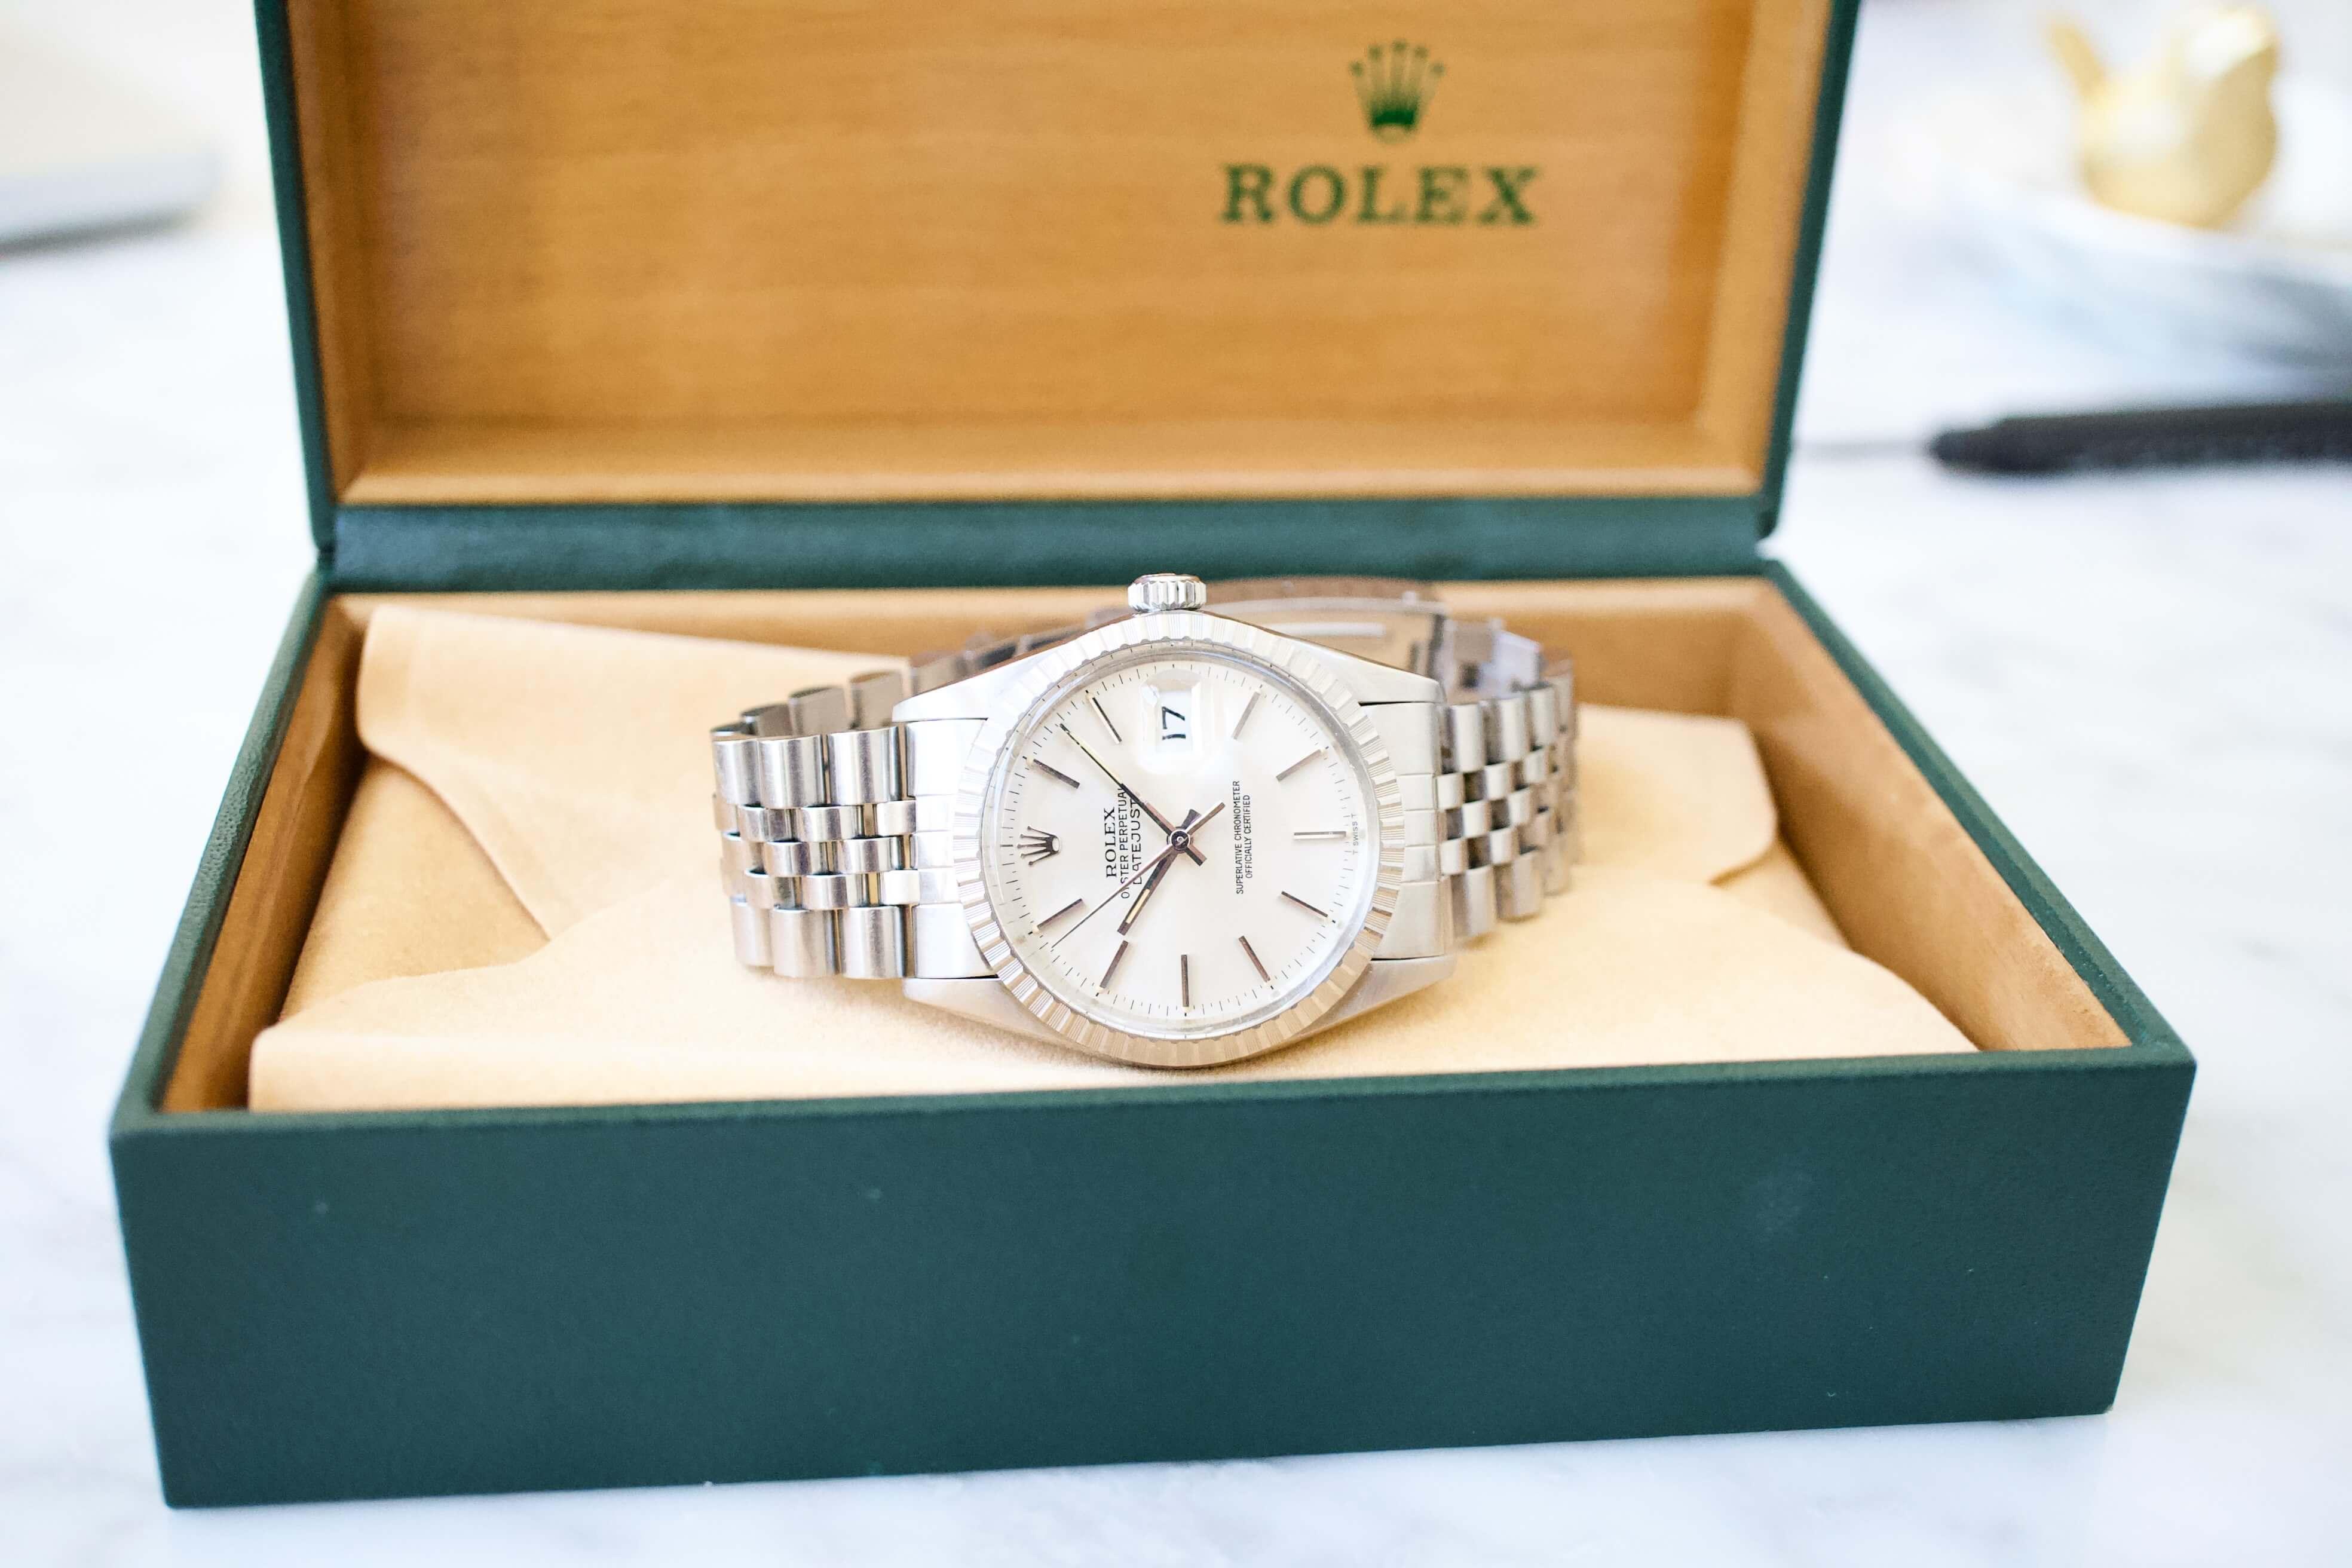 SOLDOUT: Rolex Datejust 36MM 16030 Automatic Silver Dial Steel 